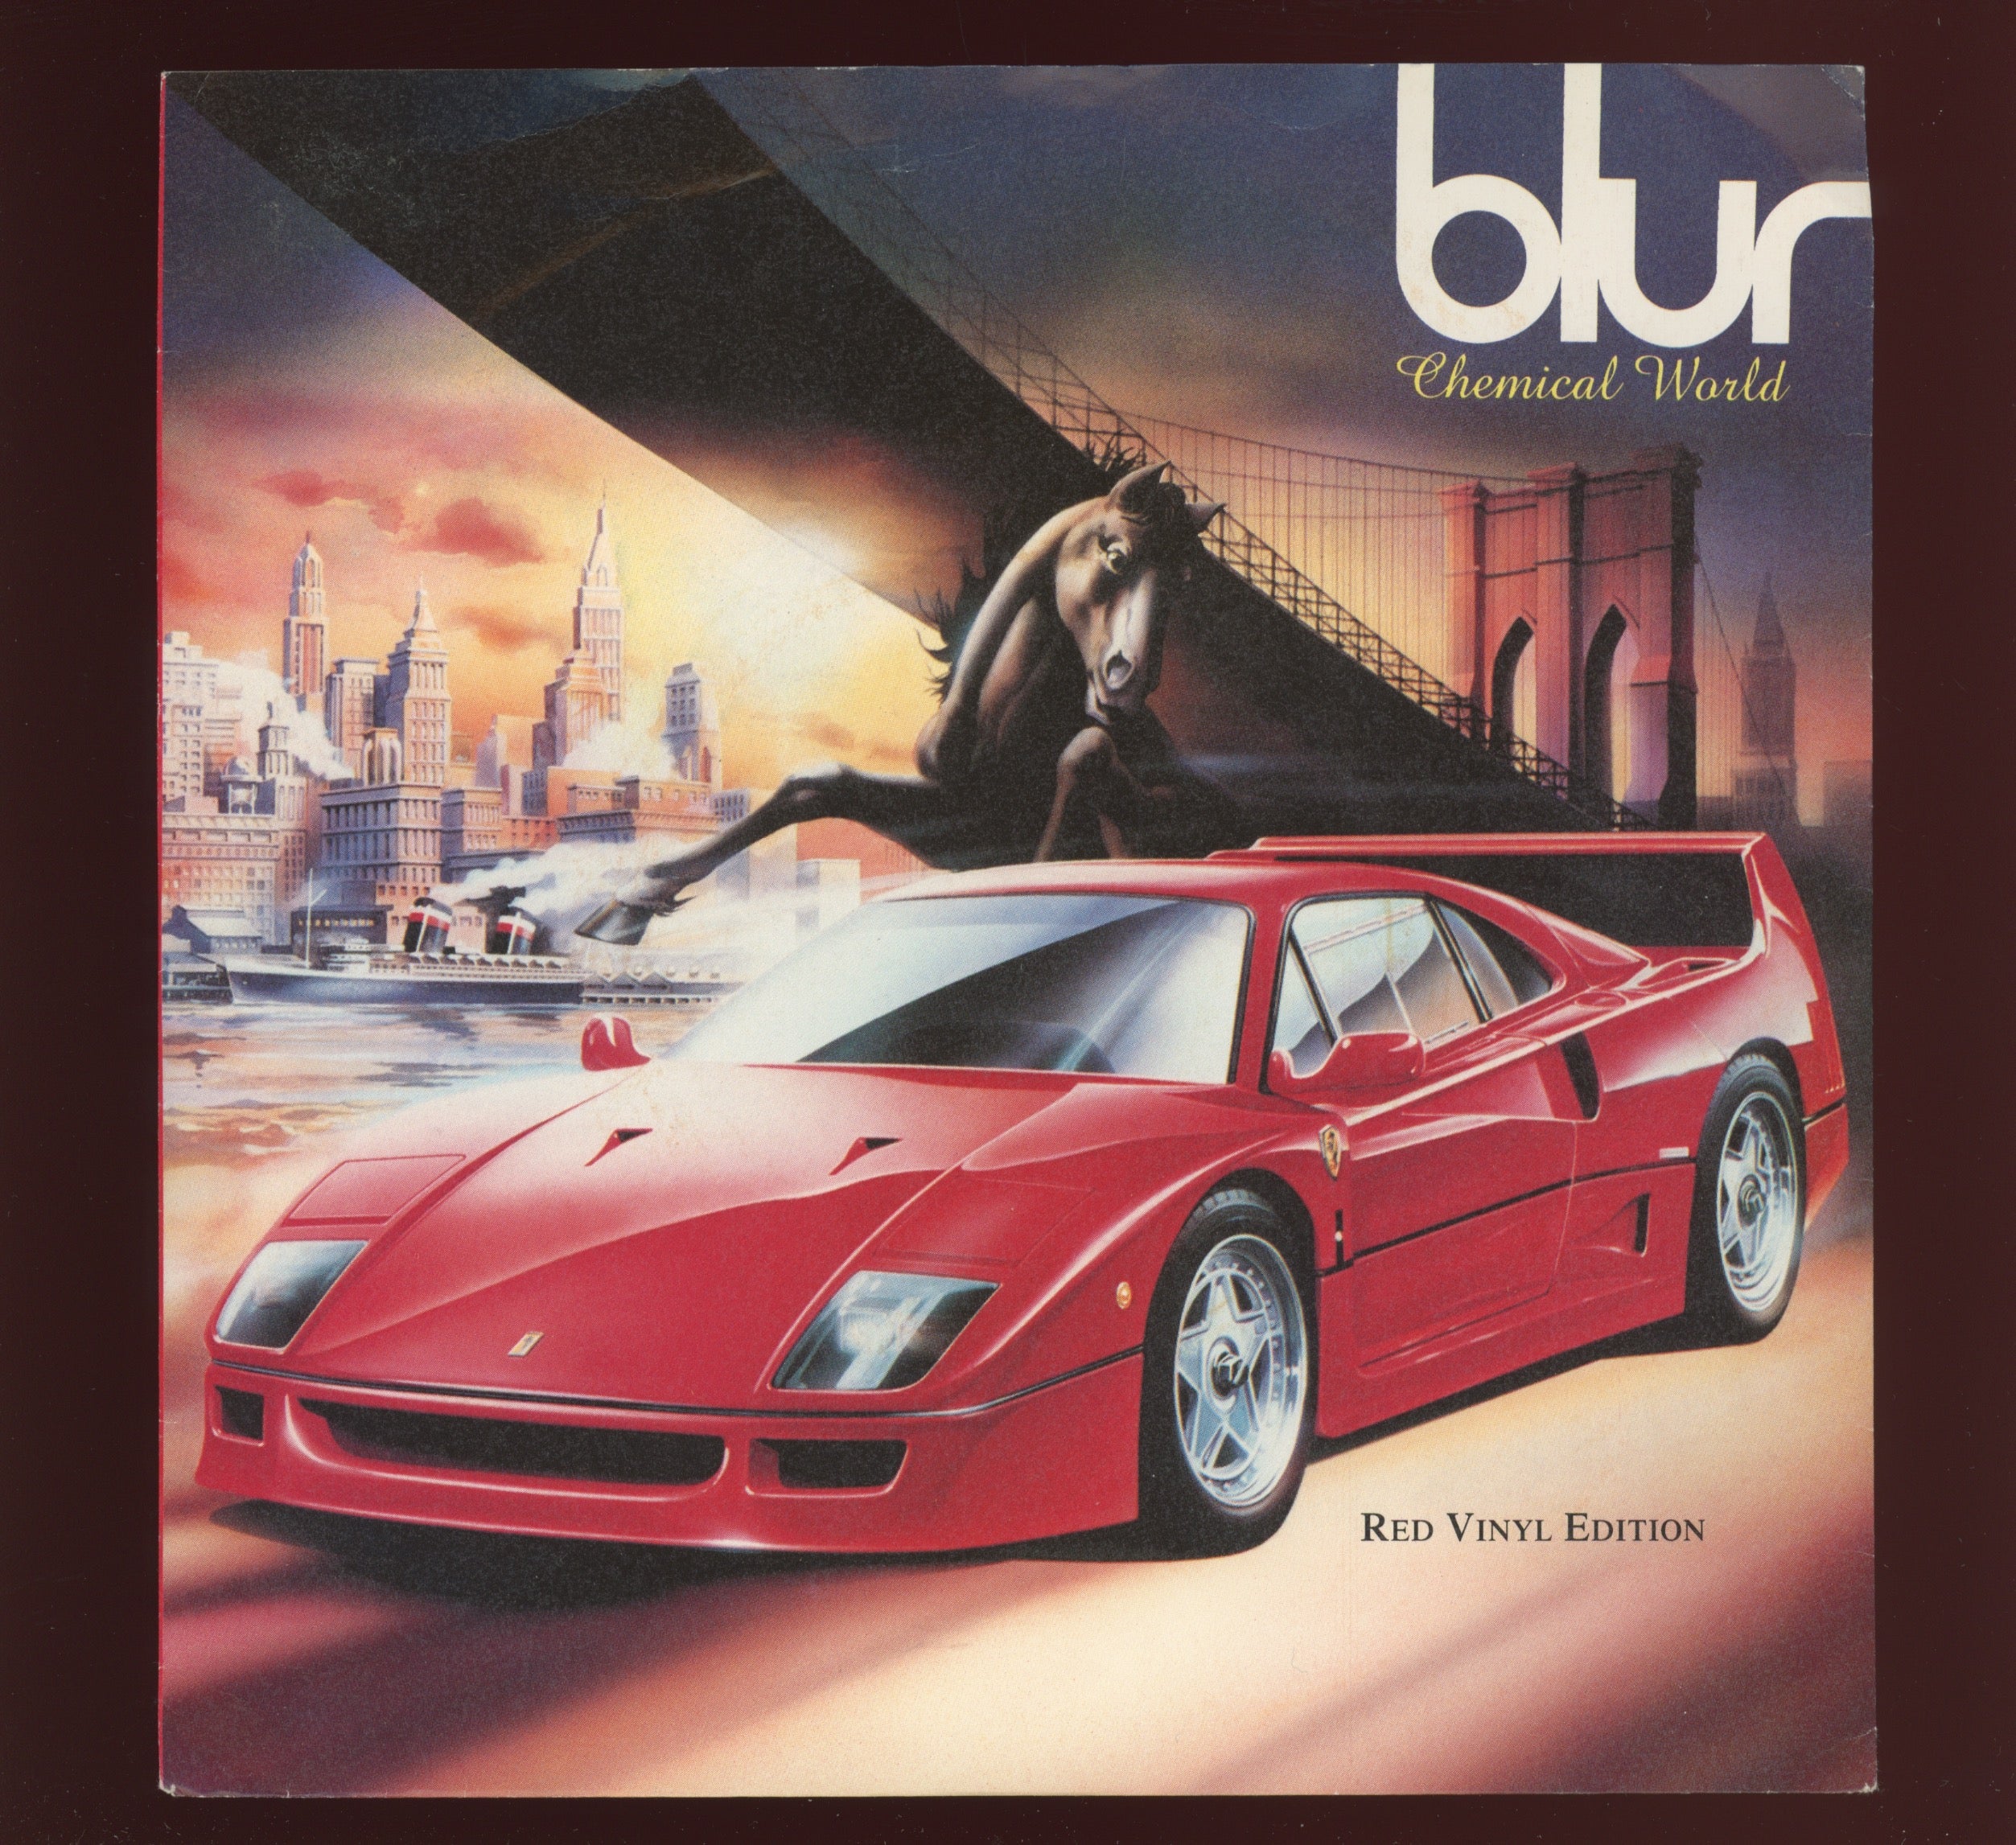 Blur - Chemical World on Food Red Vinyl UK 7" With Picture Sleeve